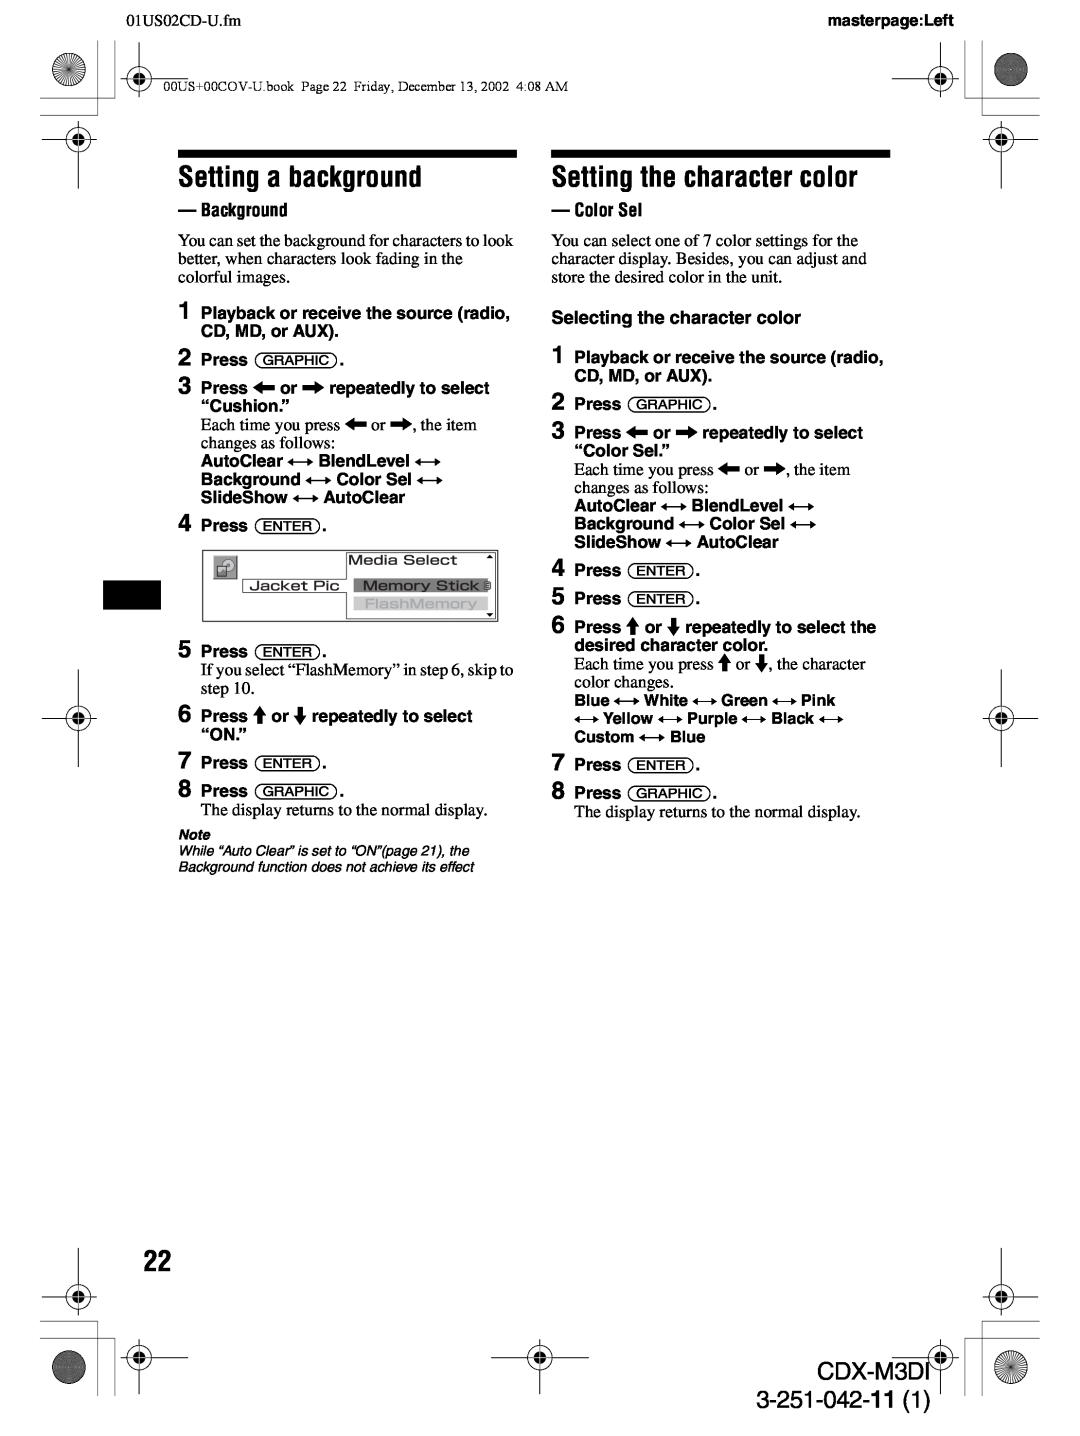 Sony CDX-M3DI operating instructions Setting a background, Setting the character color, 3-251-042-11, 01US02CD-U.fm 